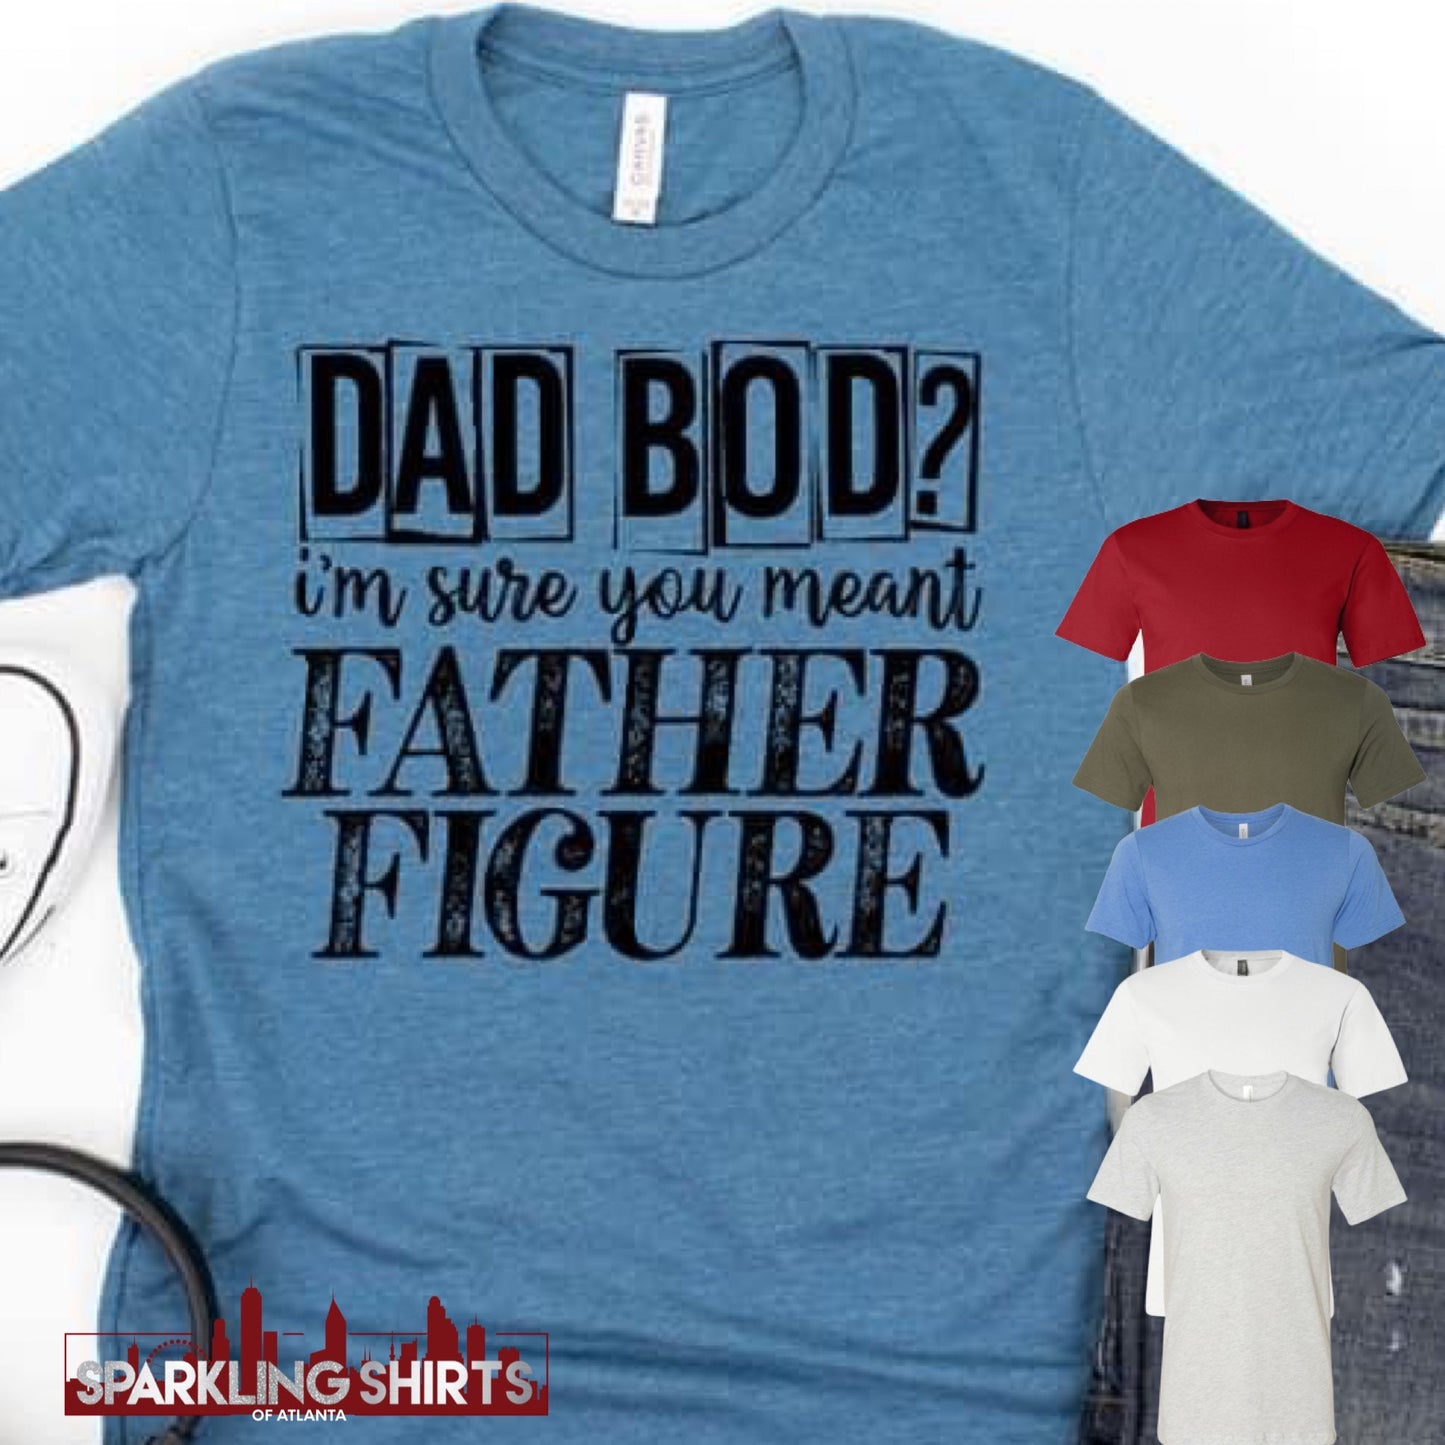 Dad Bod, I’m Sure You Meant Father Figure| Dad| Family| Men’s Tee| Graphic Tee